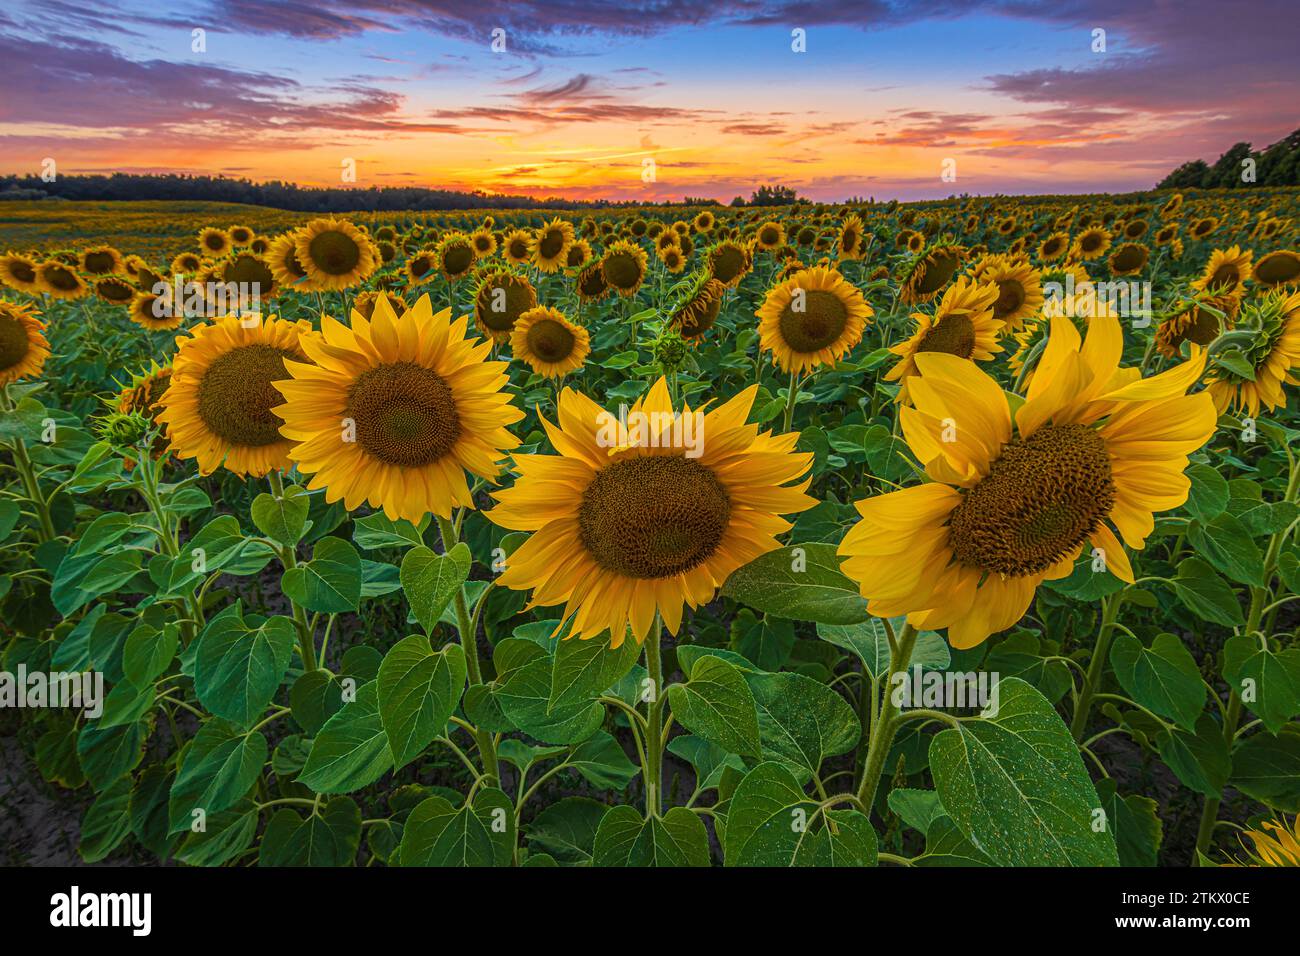 Landscape in summer. Lots of sunflowers in the evening at sunset. Opened flowers with green leaves and stems. Crops with lots of flowers with colorful Stock Photo